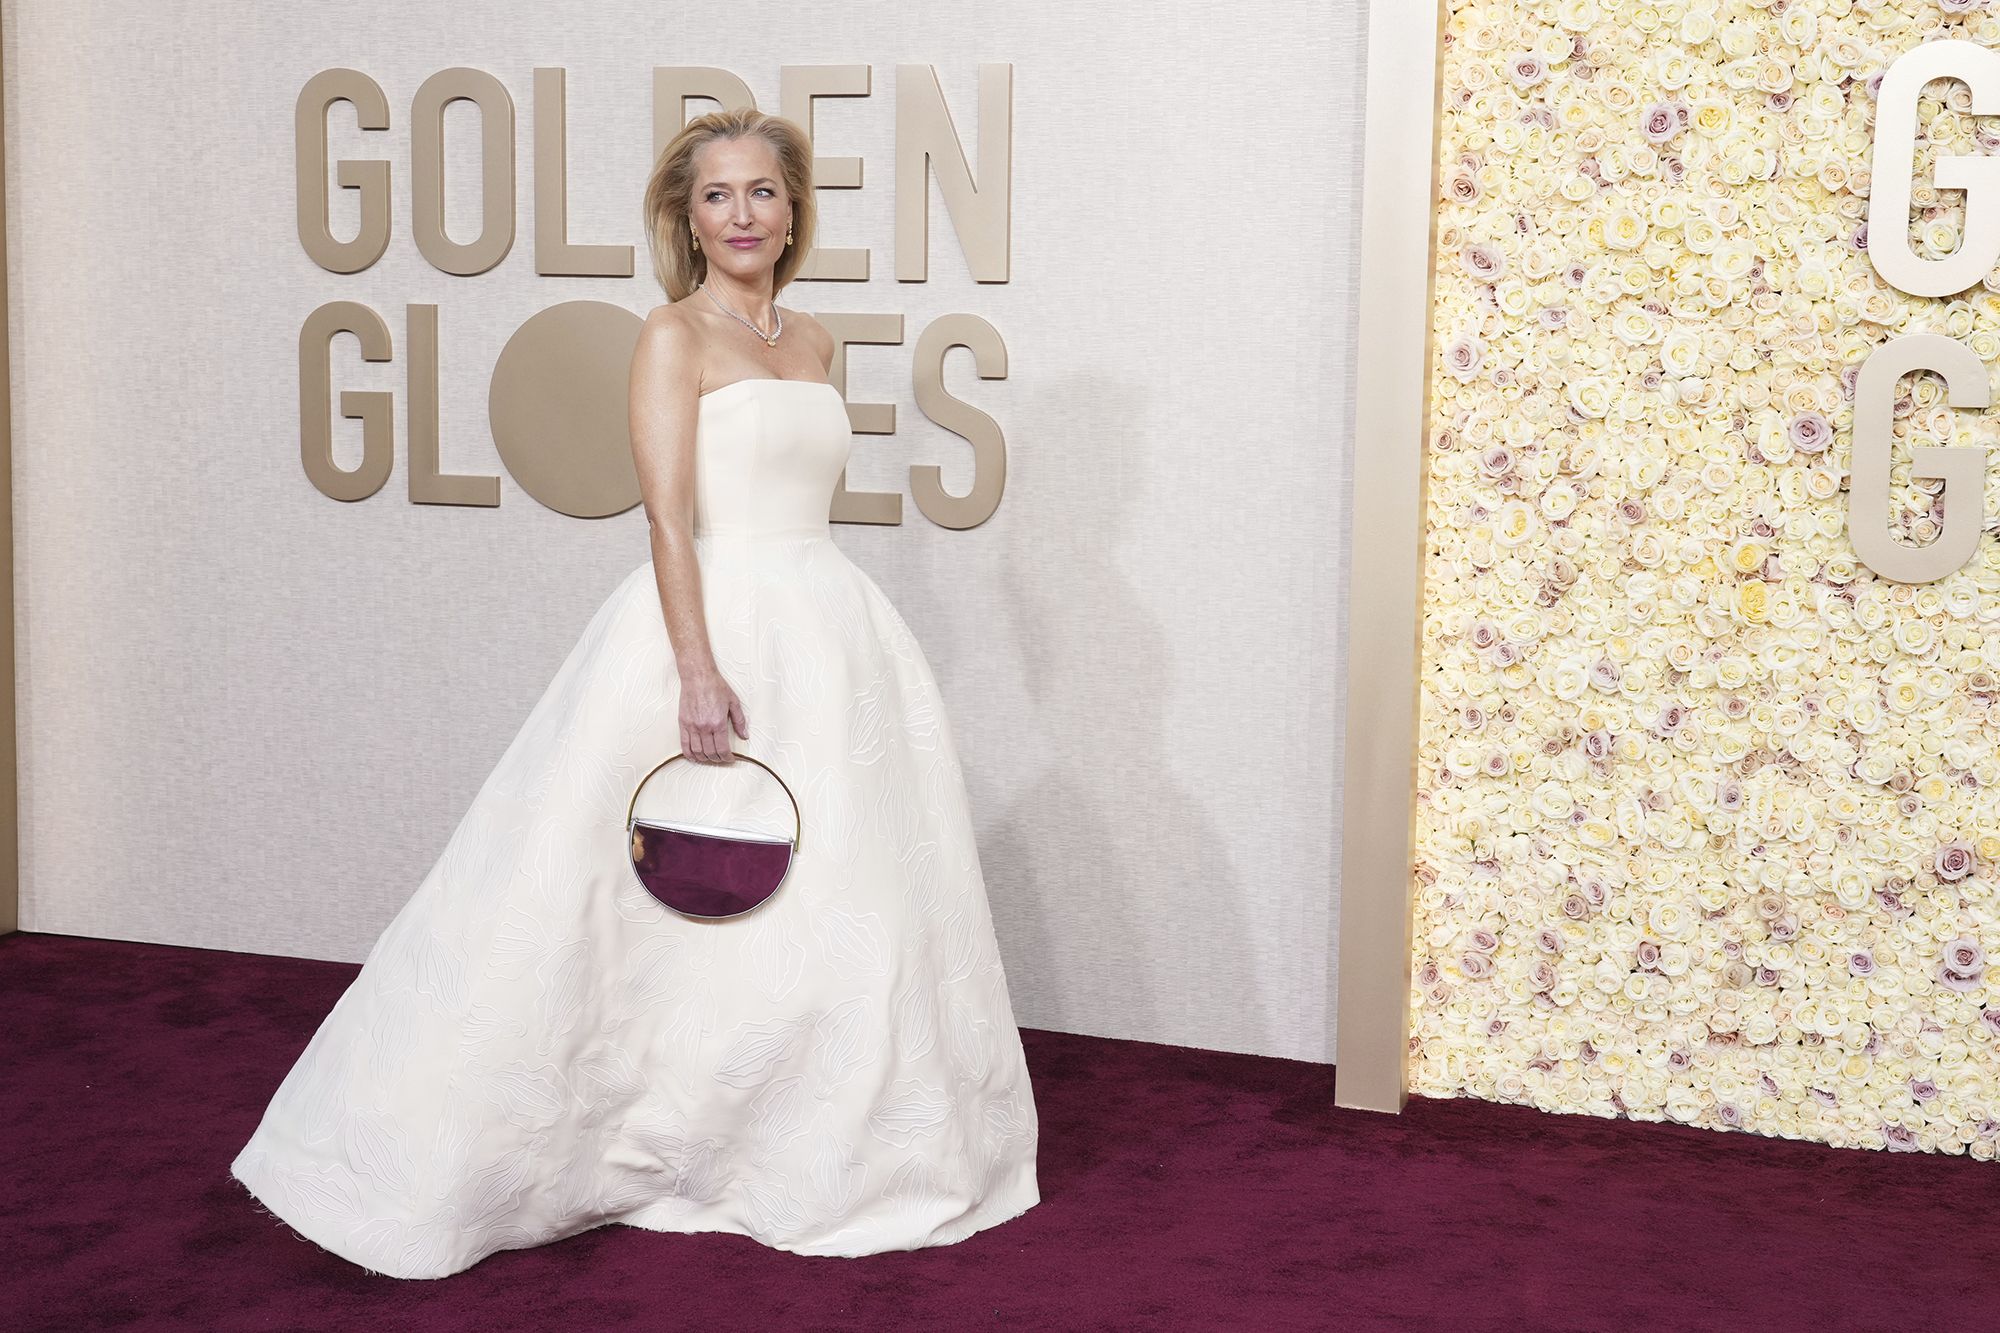 Gillian Anderson’s Bold Dress Turns Heads at the Golden Globe